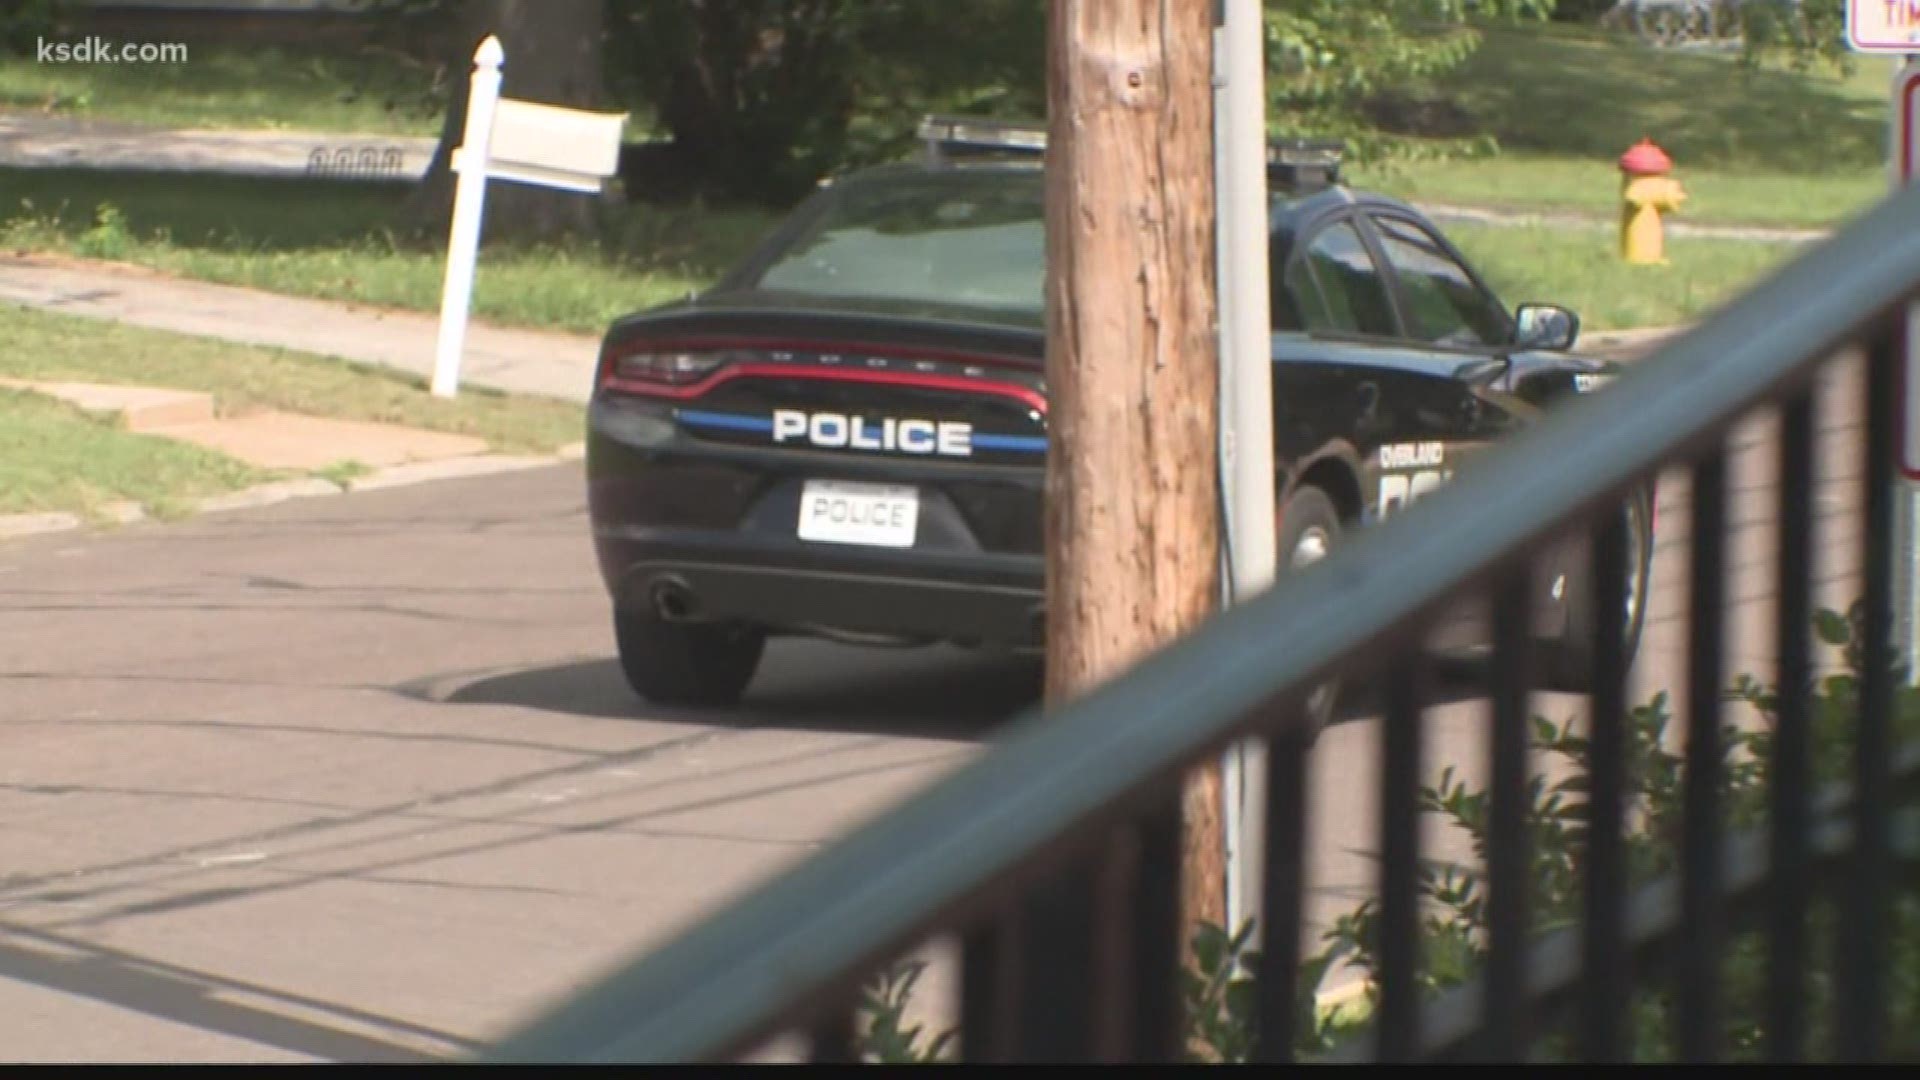 The Overland Police Department is investigating and increasing patrols in the area.